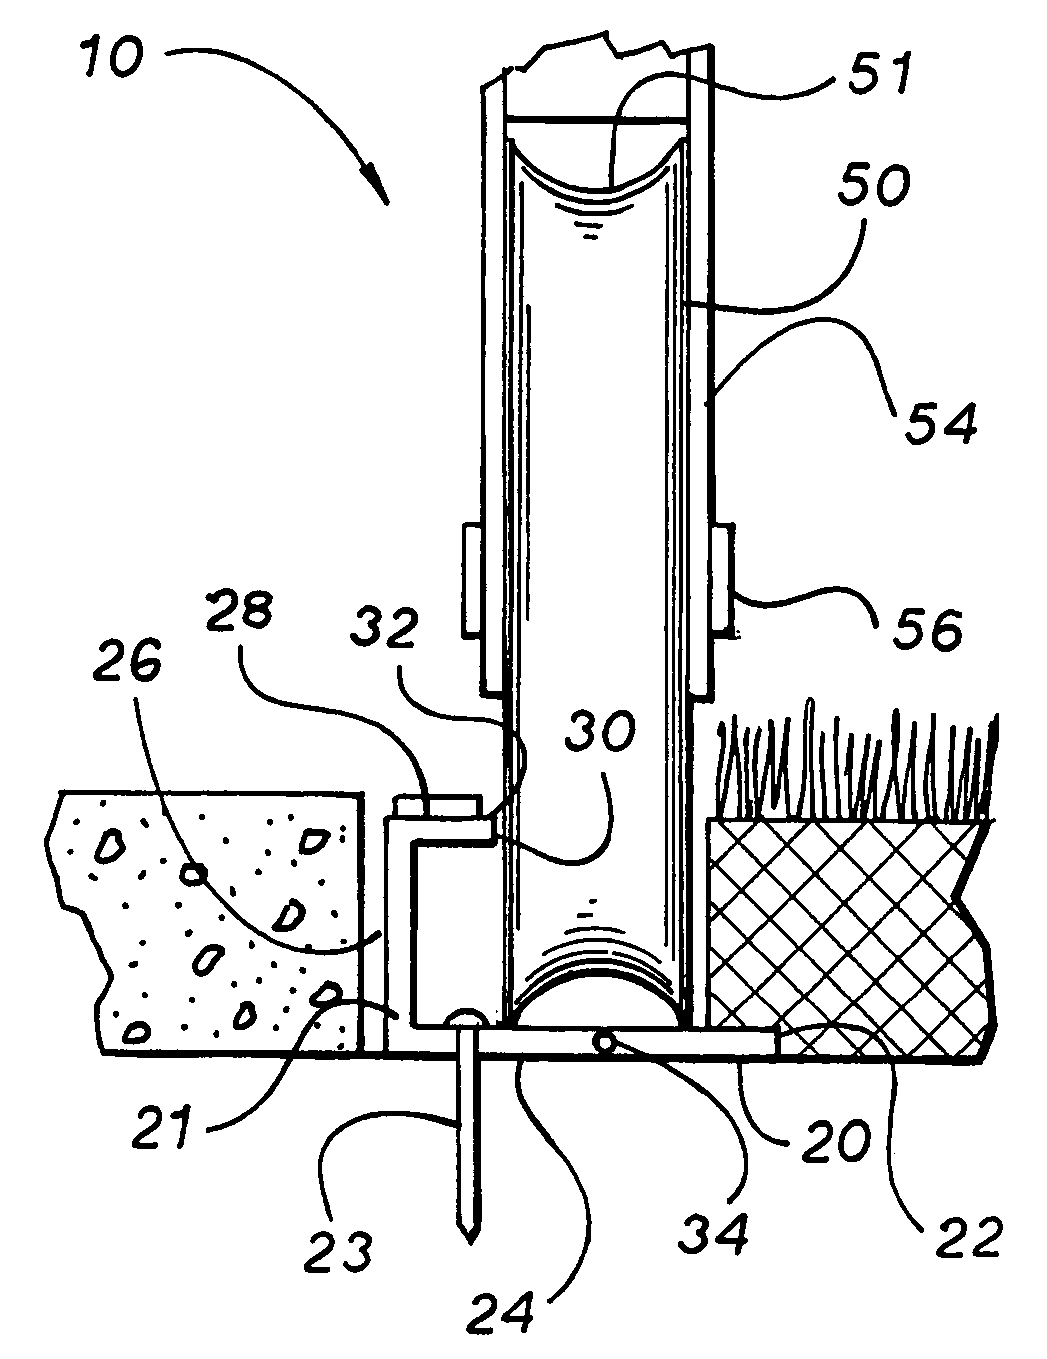 Landscape edging system and device and methods of installation and use thereof